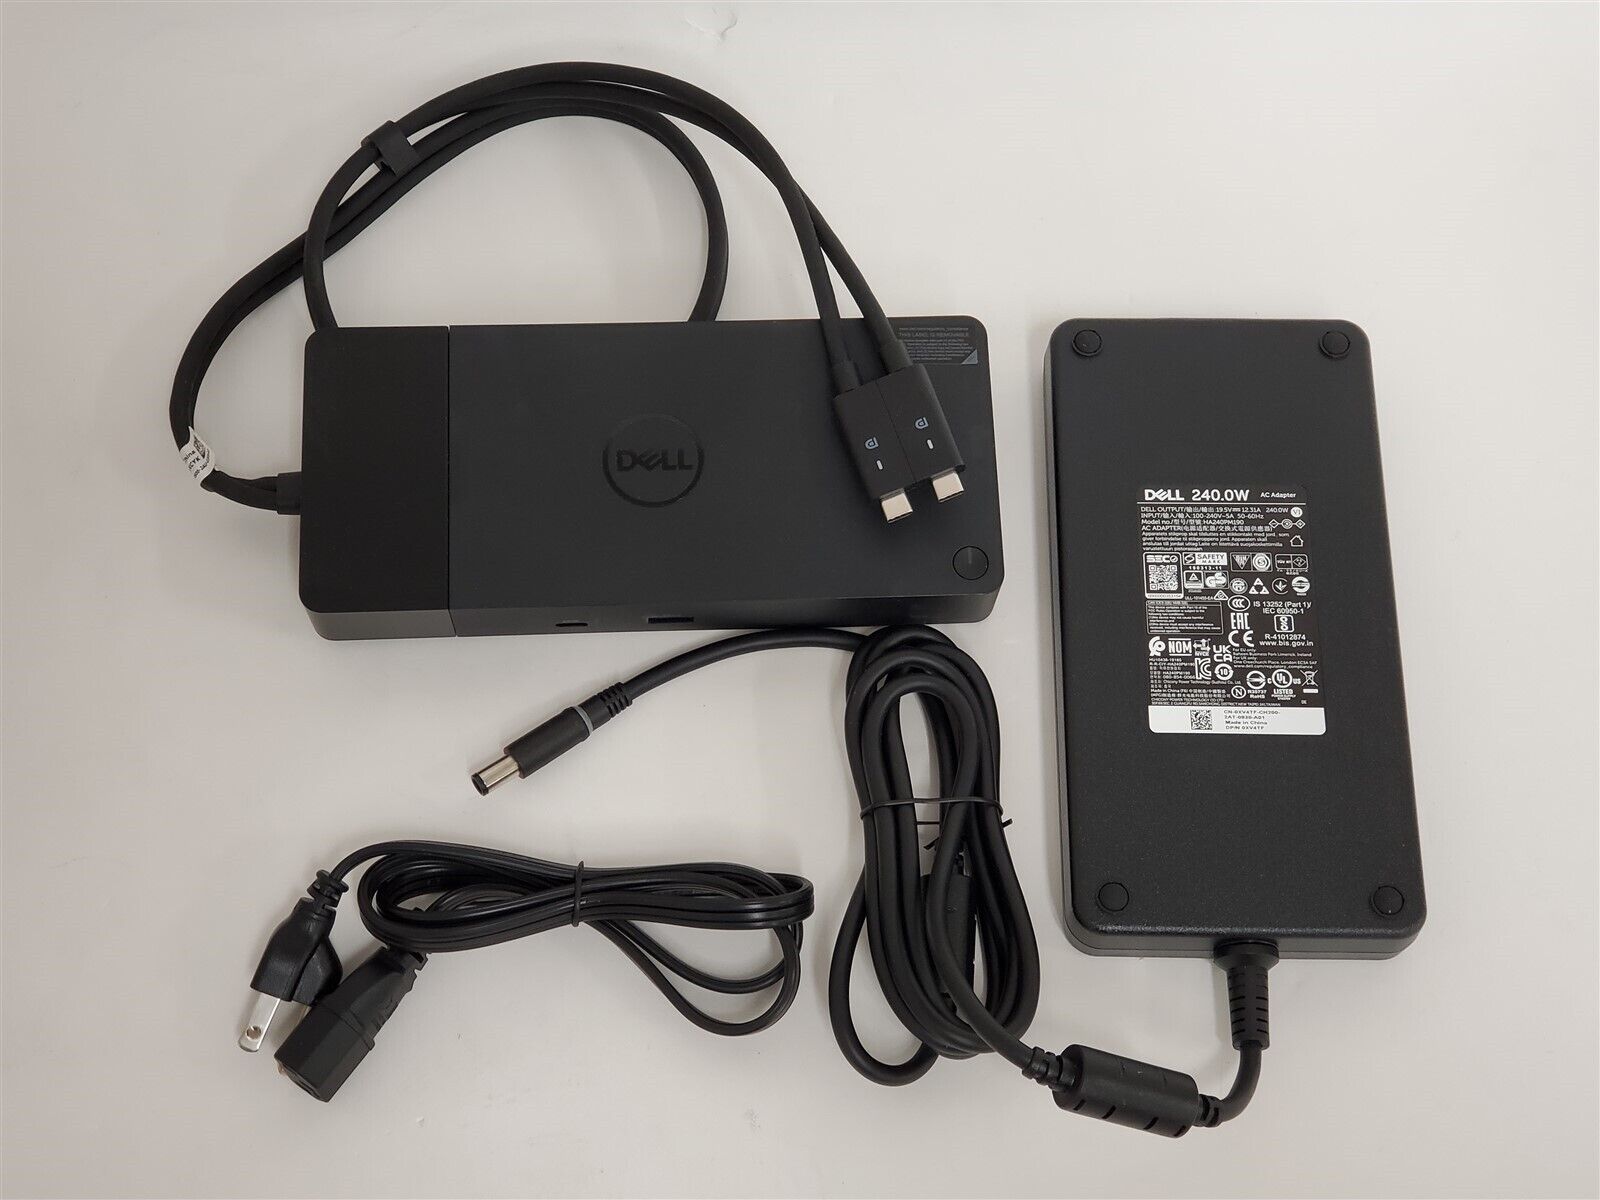 Dell Performance Dock WD19DCS Dual Cable Docking Station w/240w Adapter Black